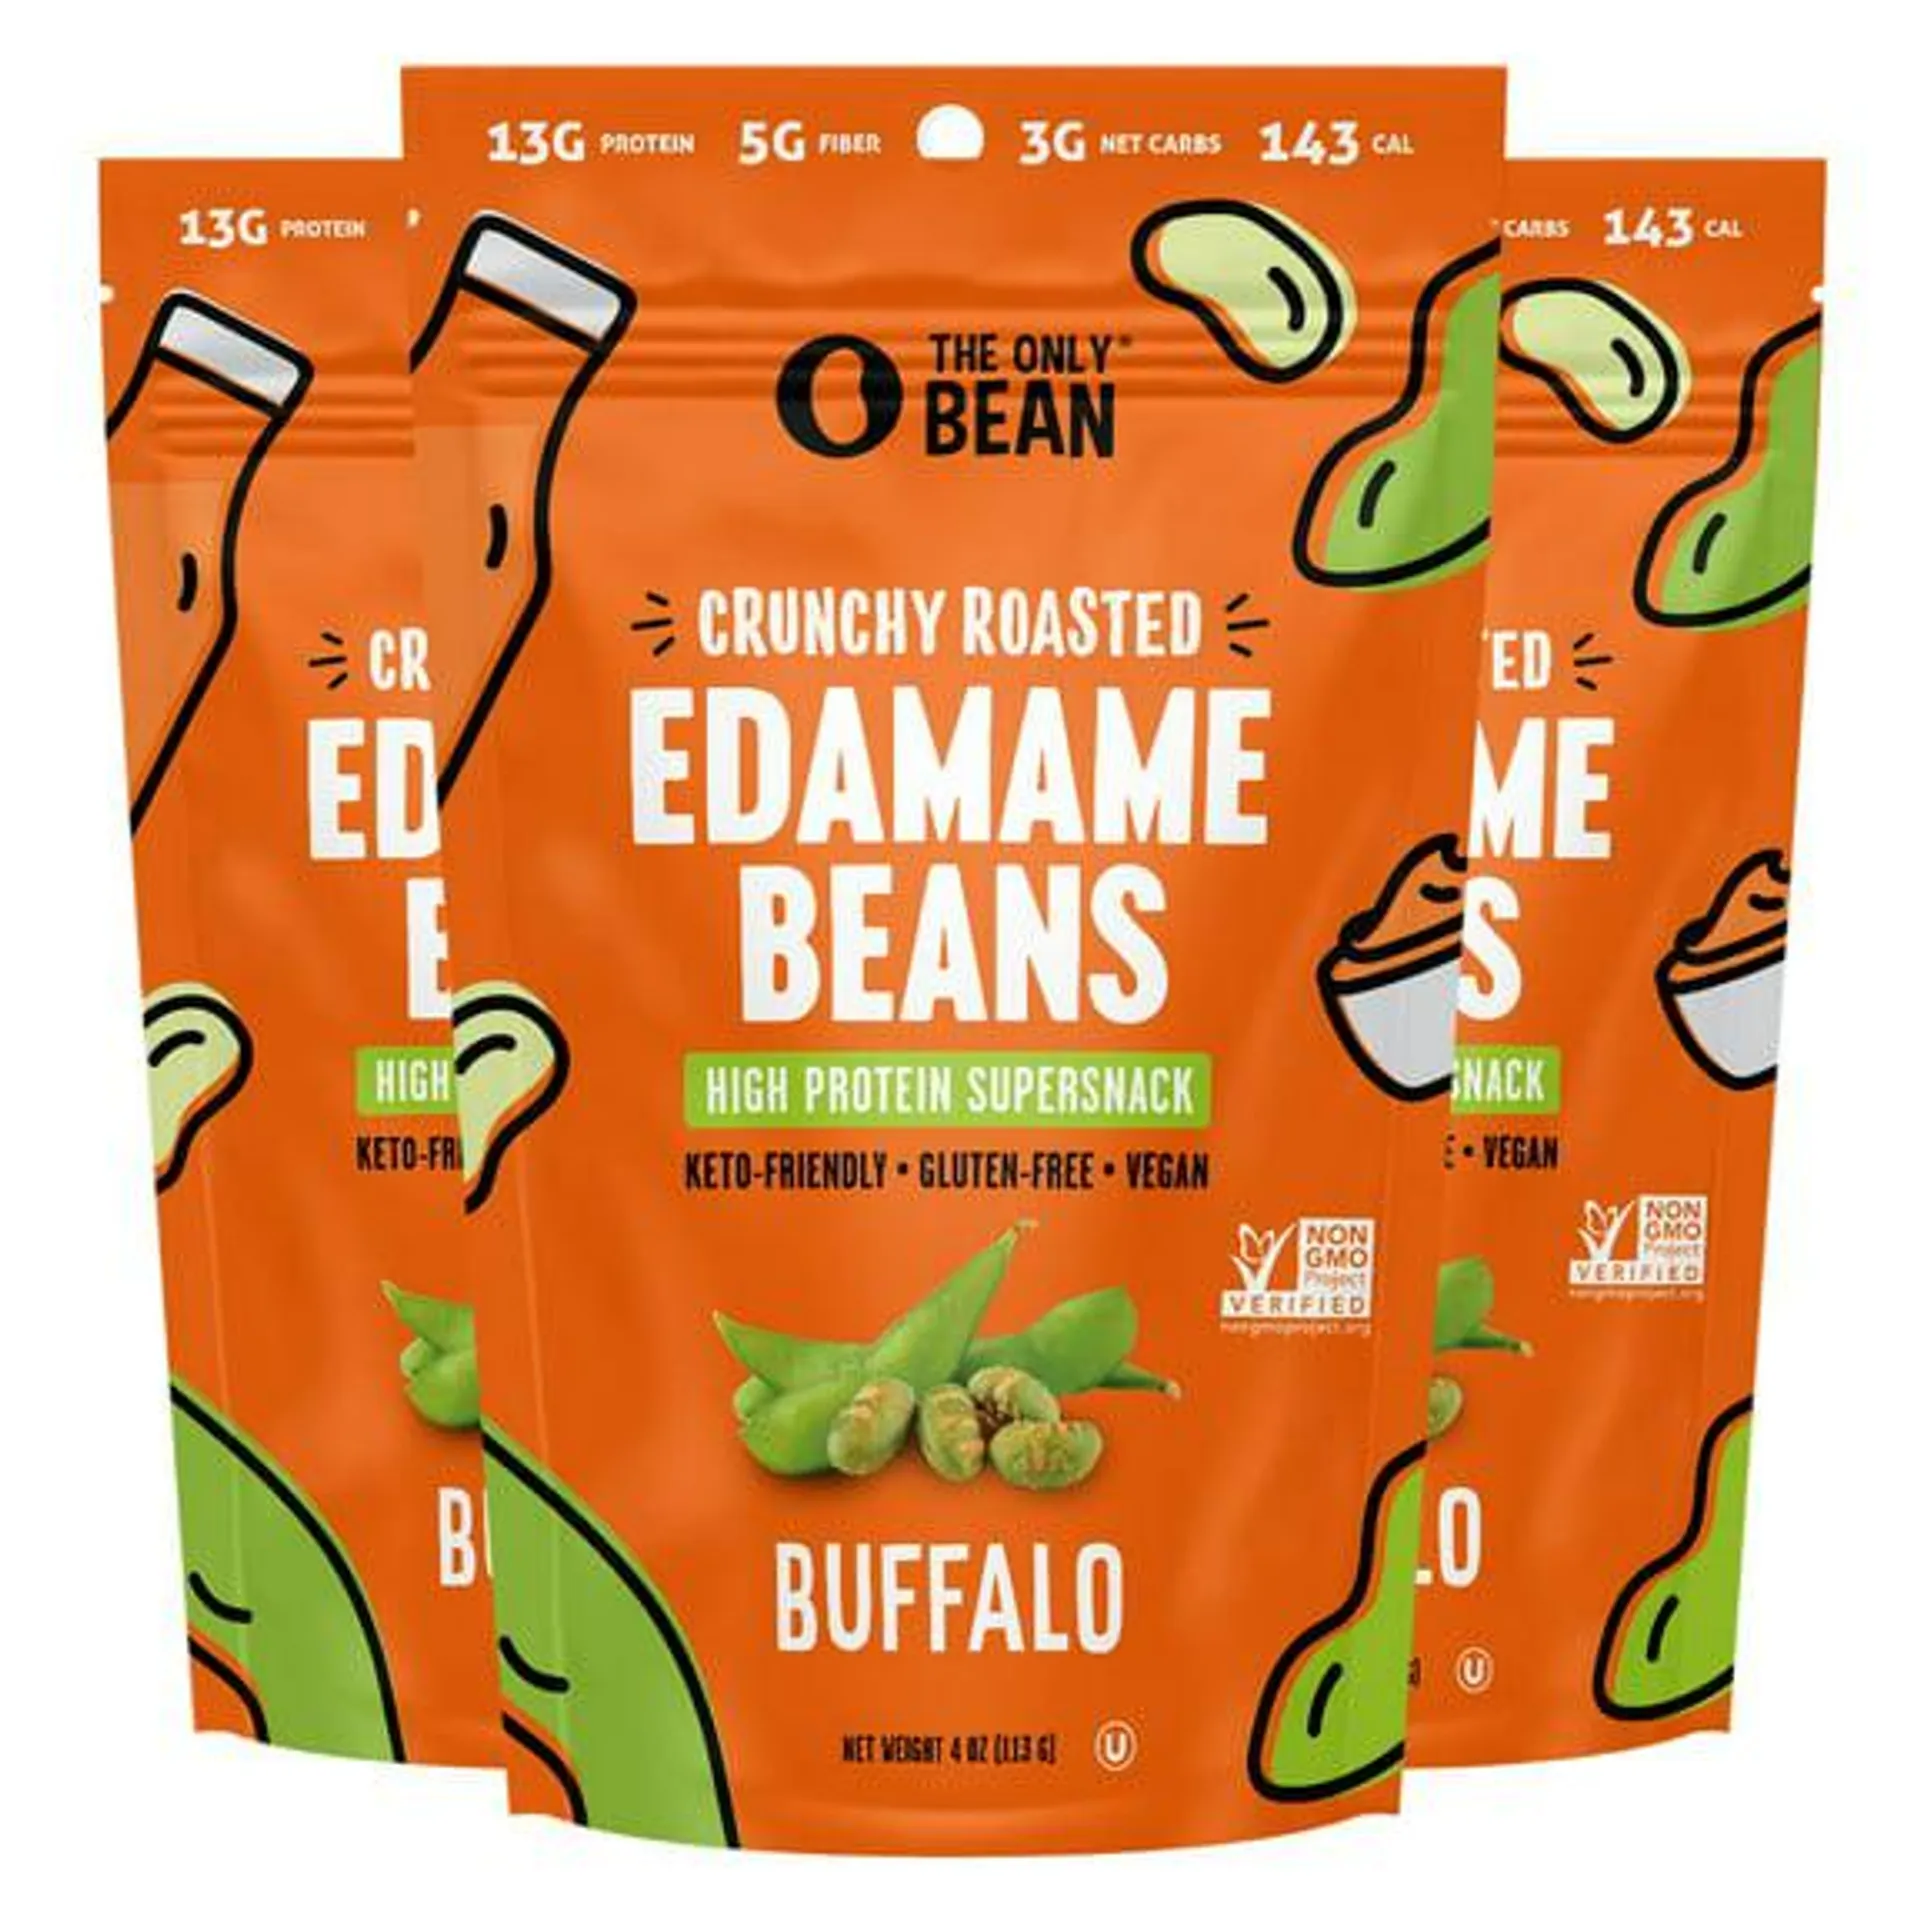 Crunchy Roasted Edamame Beans (Buffalo) - Keto Snacks (3g Net) - High Protein Healthy Snacks (13g Protein) - Low Carb & Calorie, Gluten-Free Snack, Vegan Keto Food - 4 oz (3 Pack)